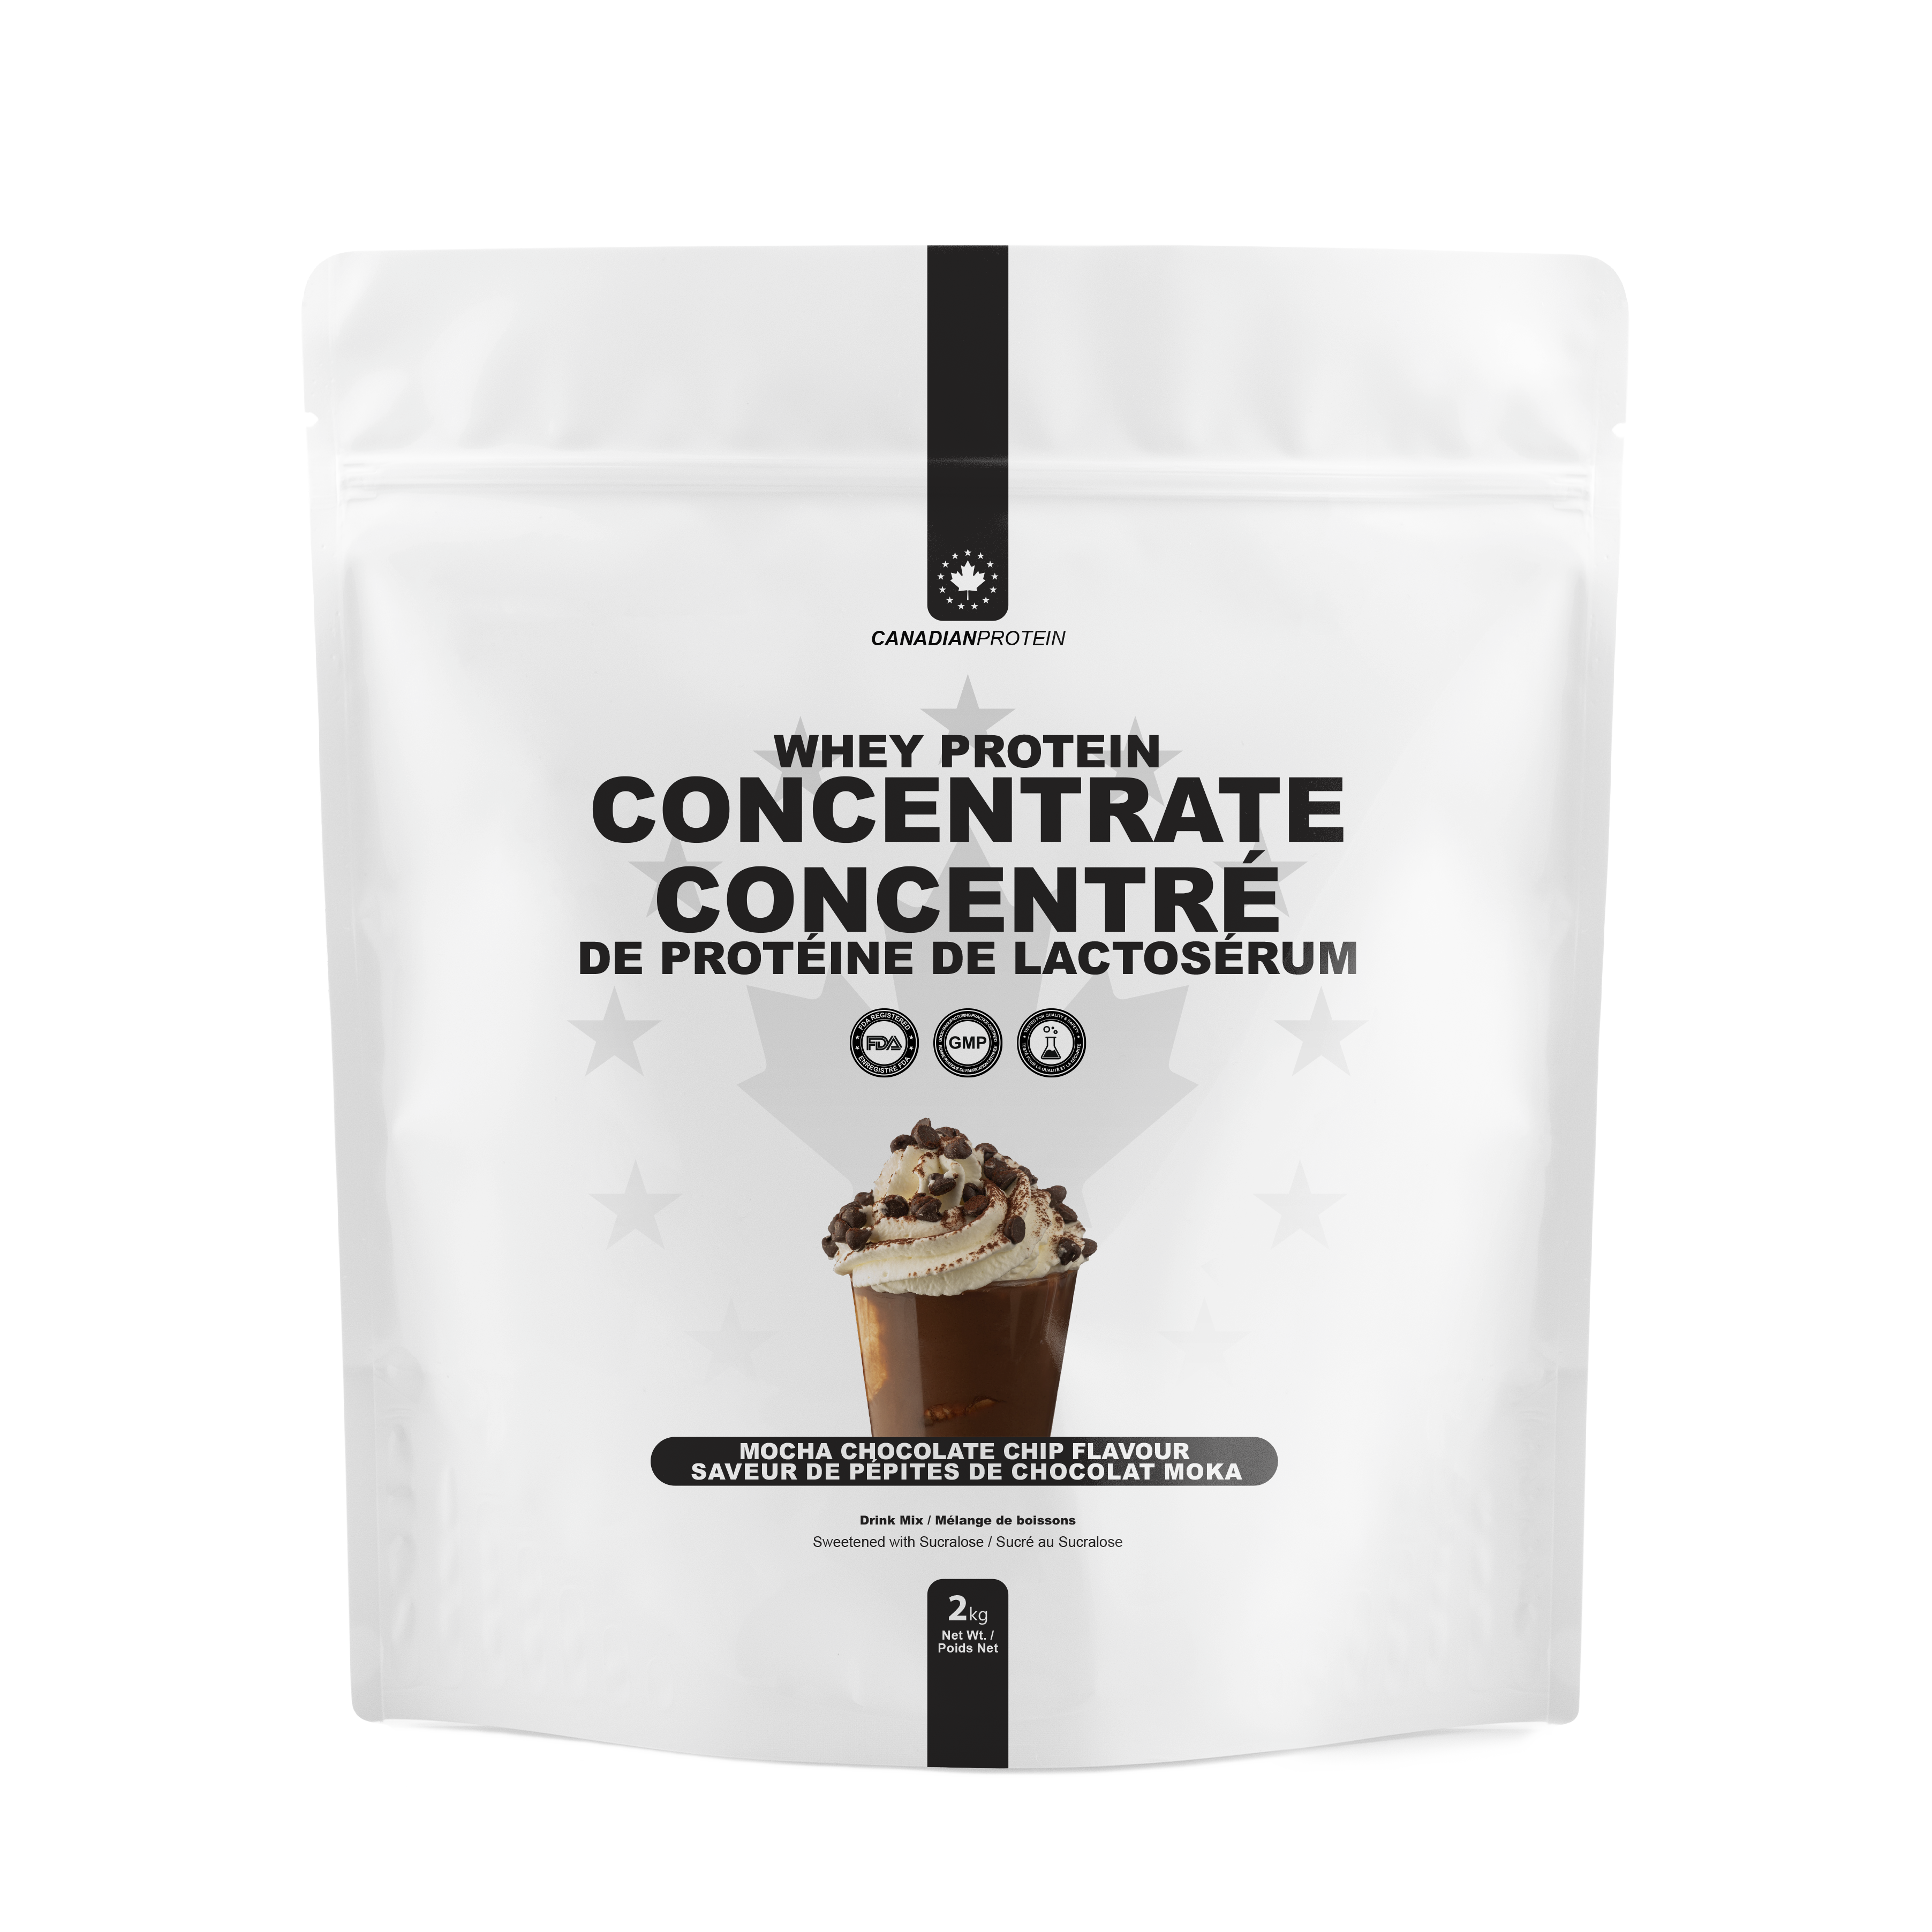 Limited Edition Mocha Chocolate Chip Whey Protein Concentrate